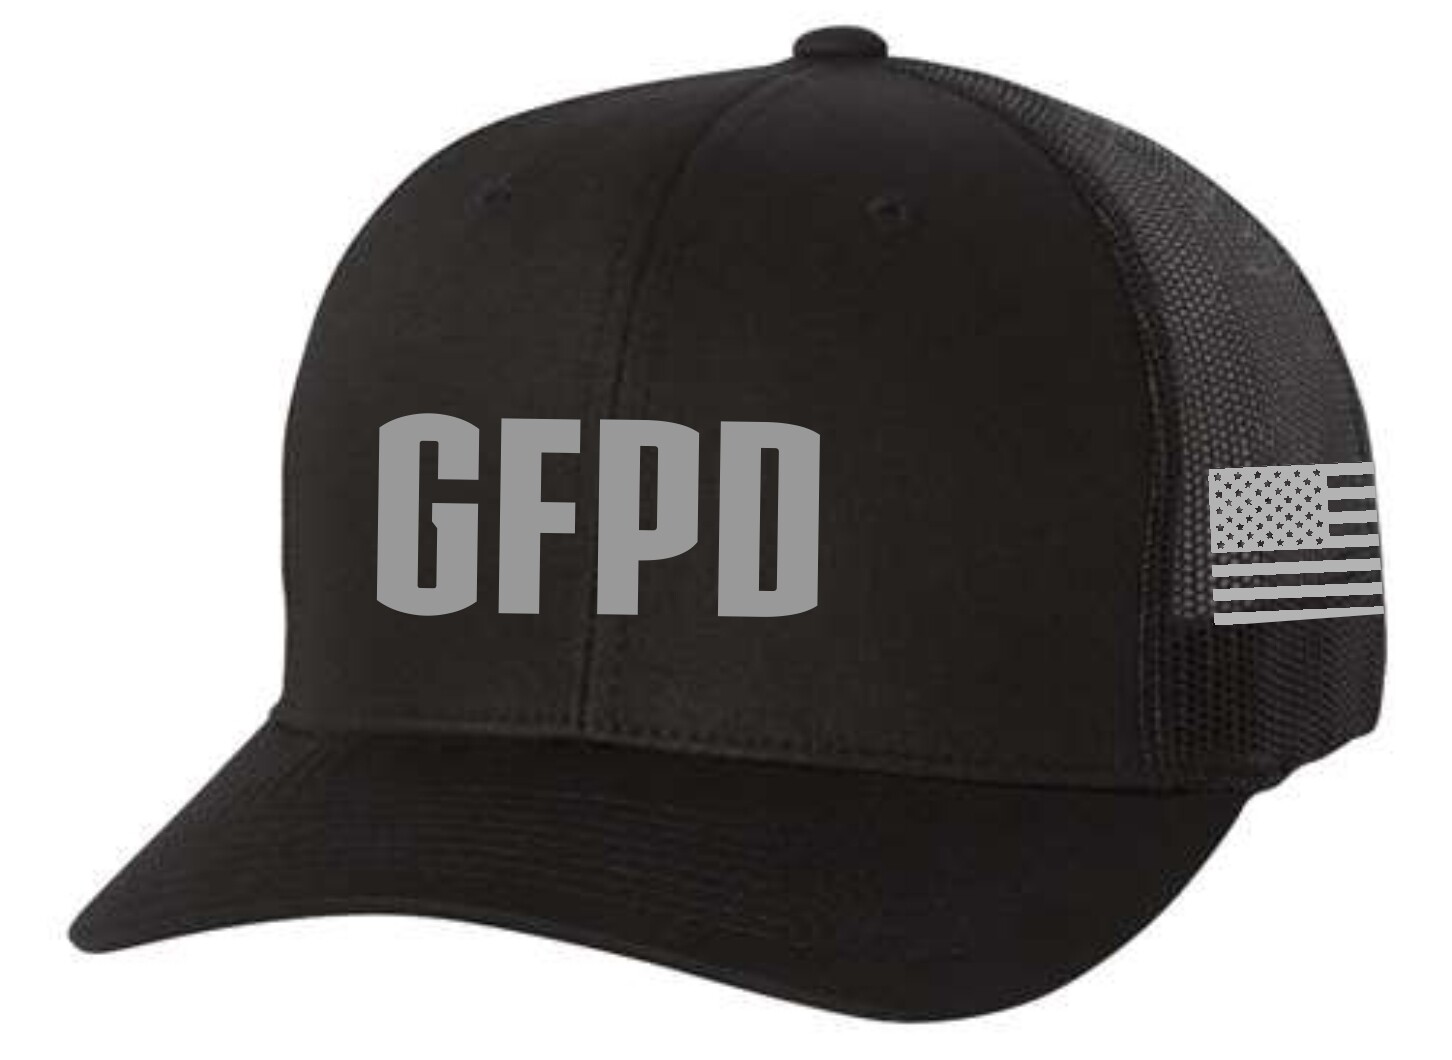 GFPD-104C GFPD EMBROIDERED